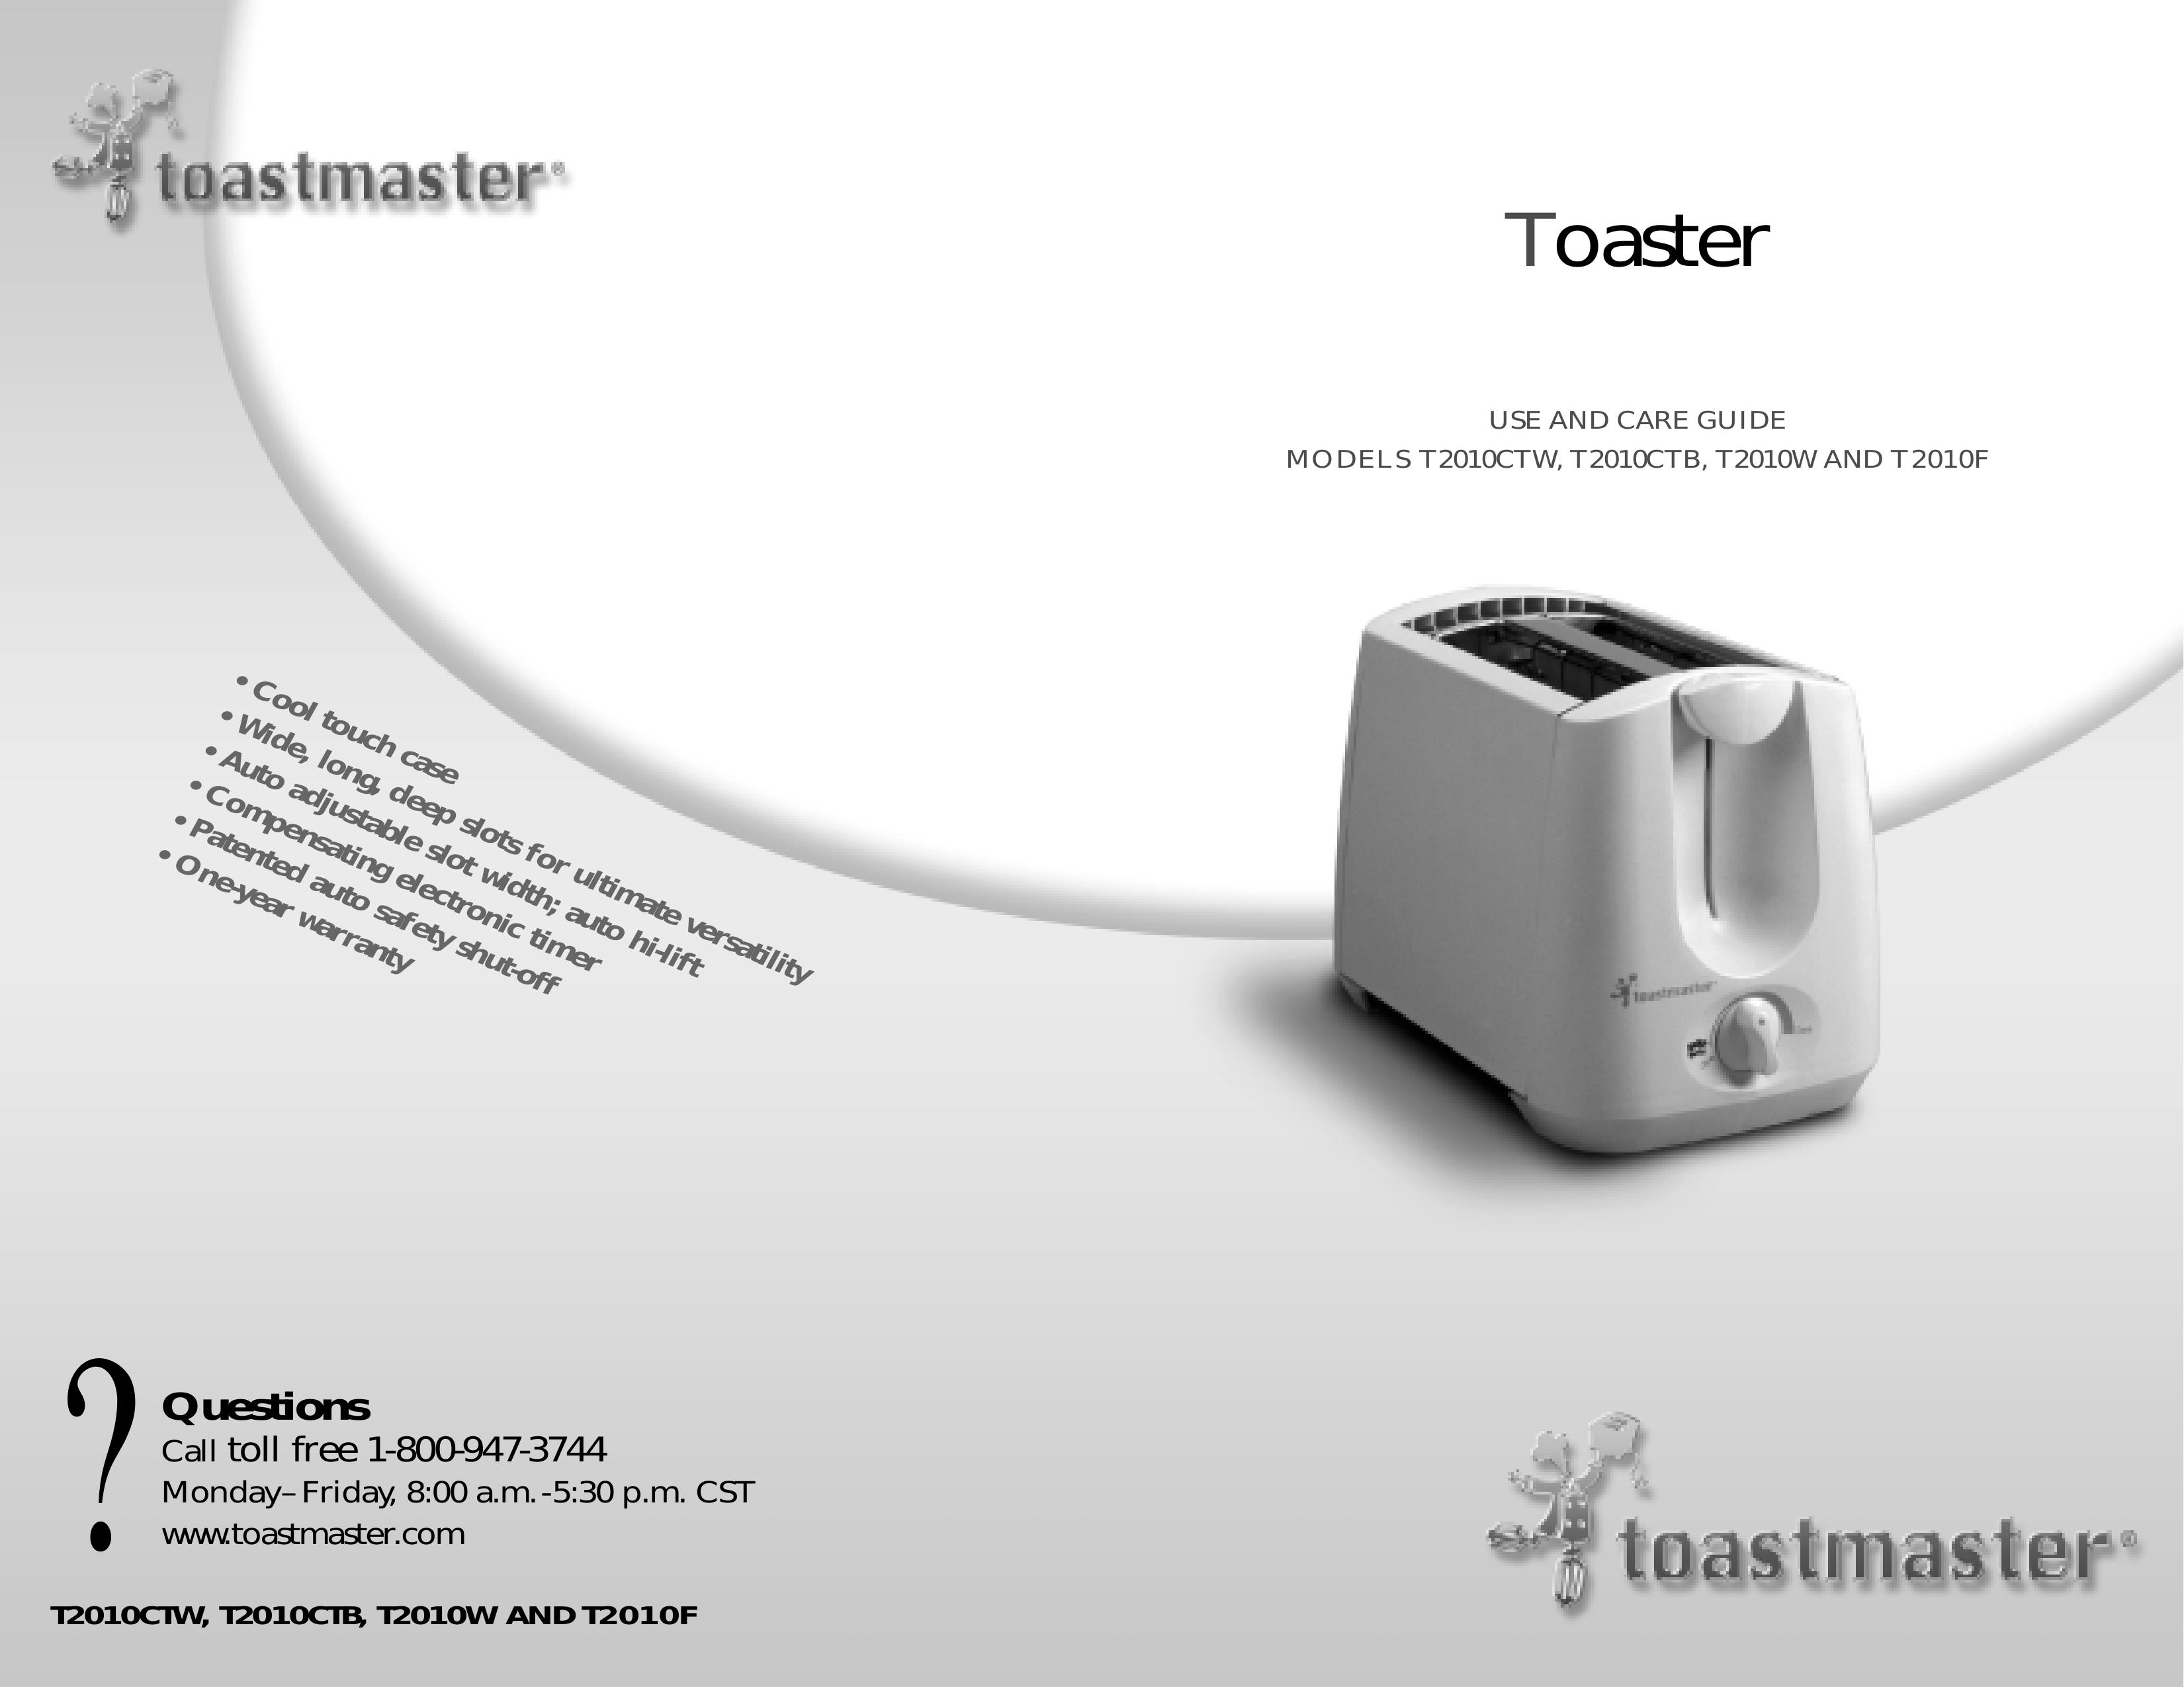 Toastmaster T2010CTW Toaster User Manual